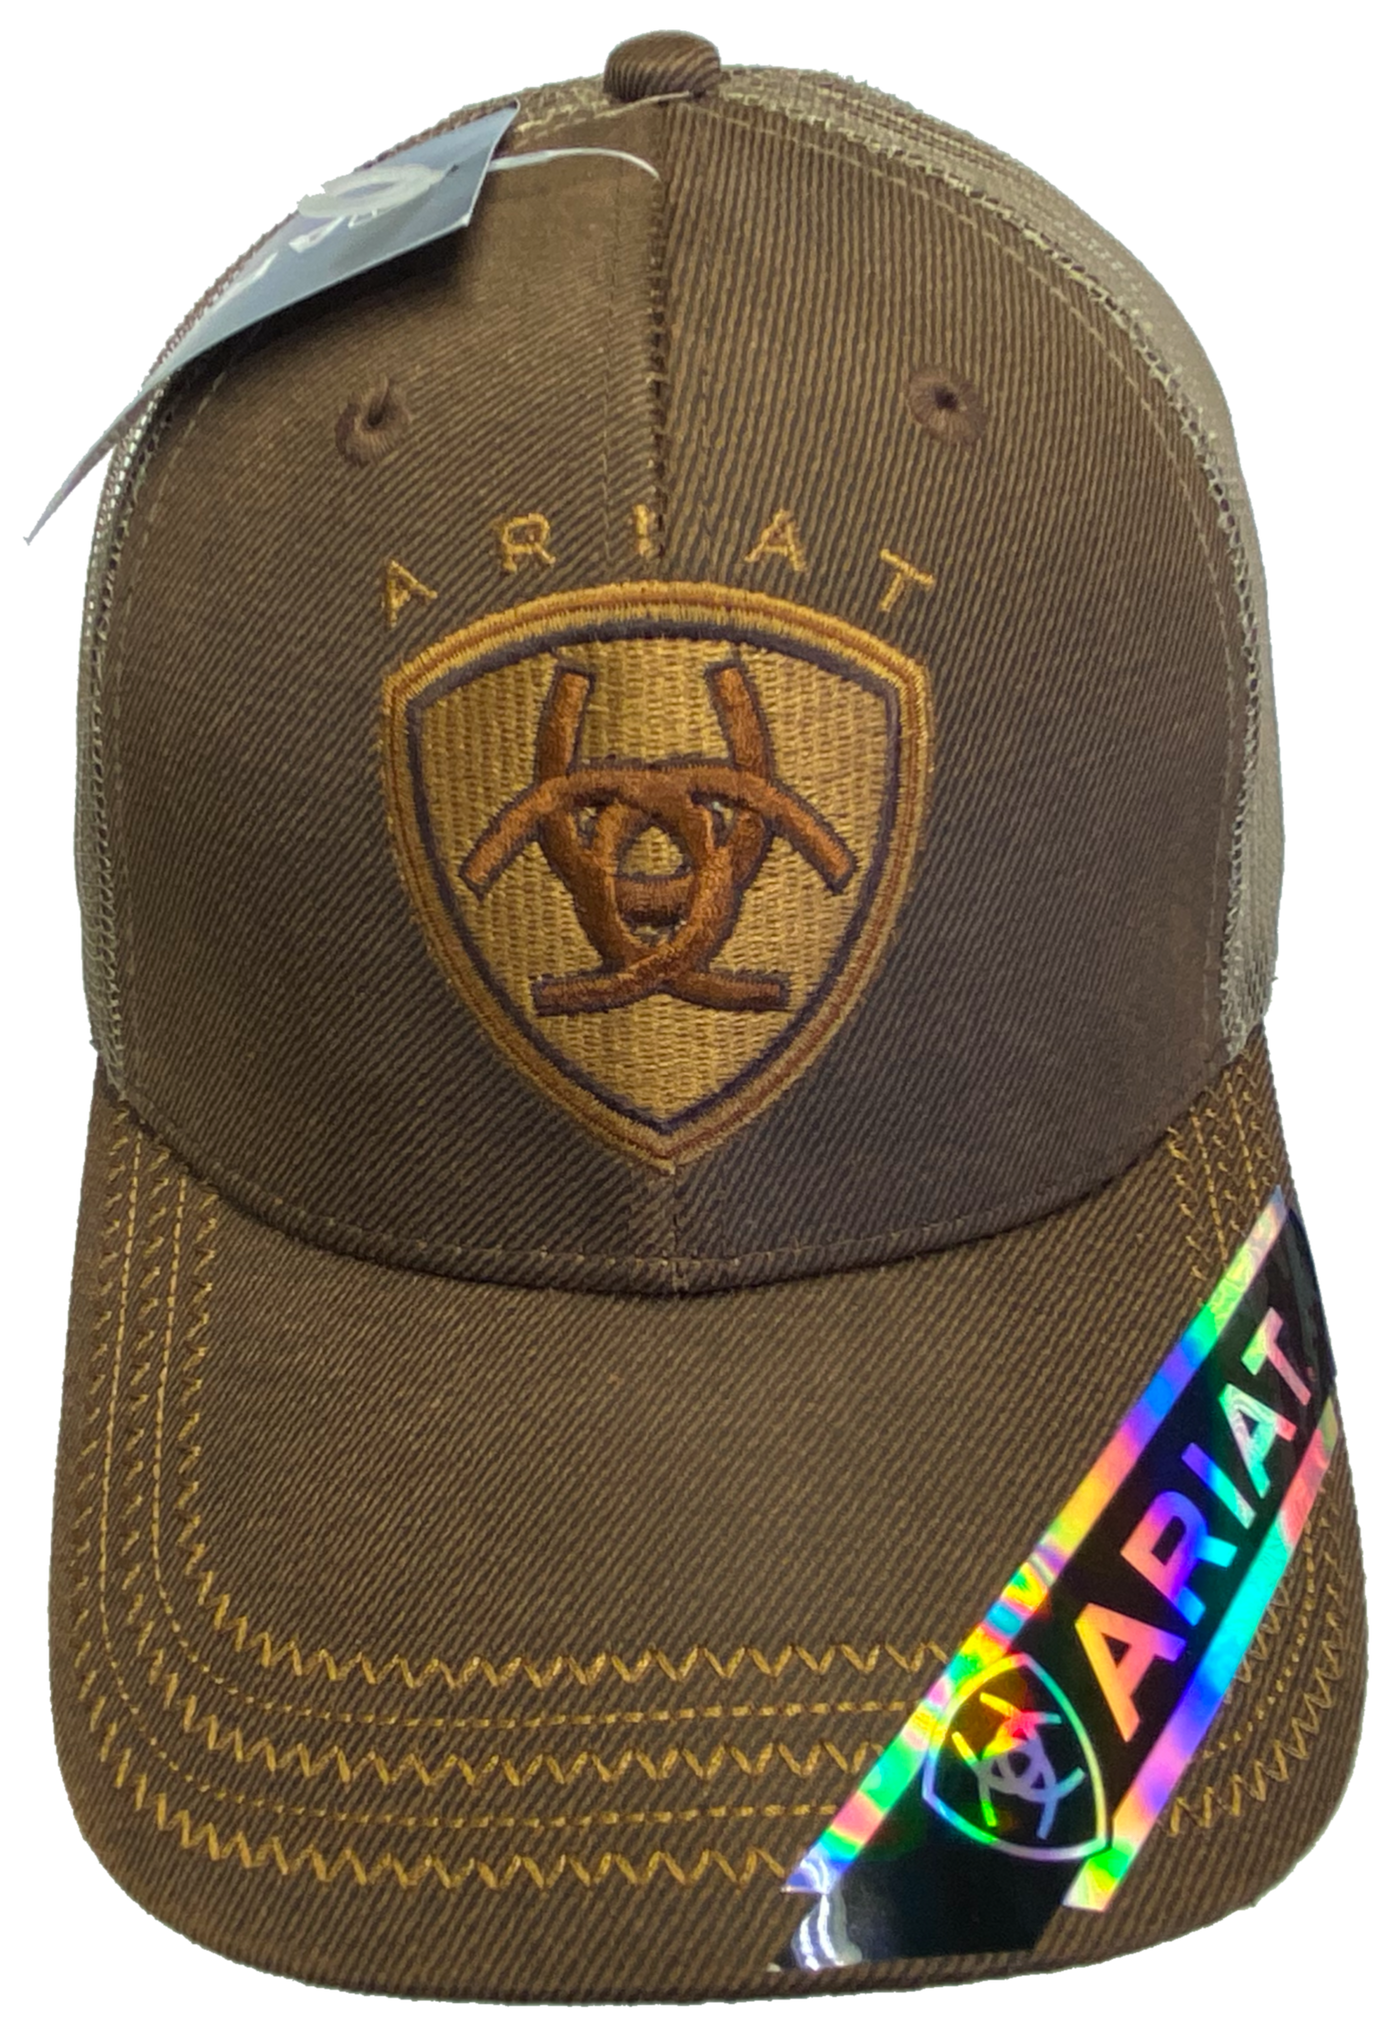 Brown Trucker cap with tan mesh back and velcro closure. Structured front has Ariat logo embroidered. Available at our shop just outside Nashville in Smyrna, TN.